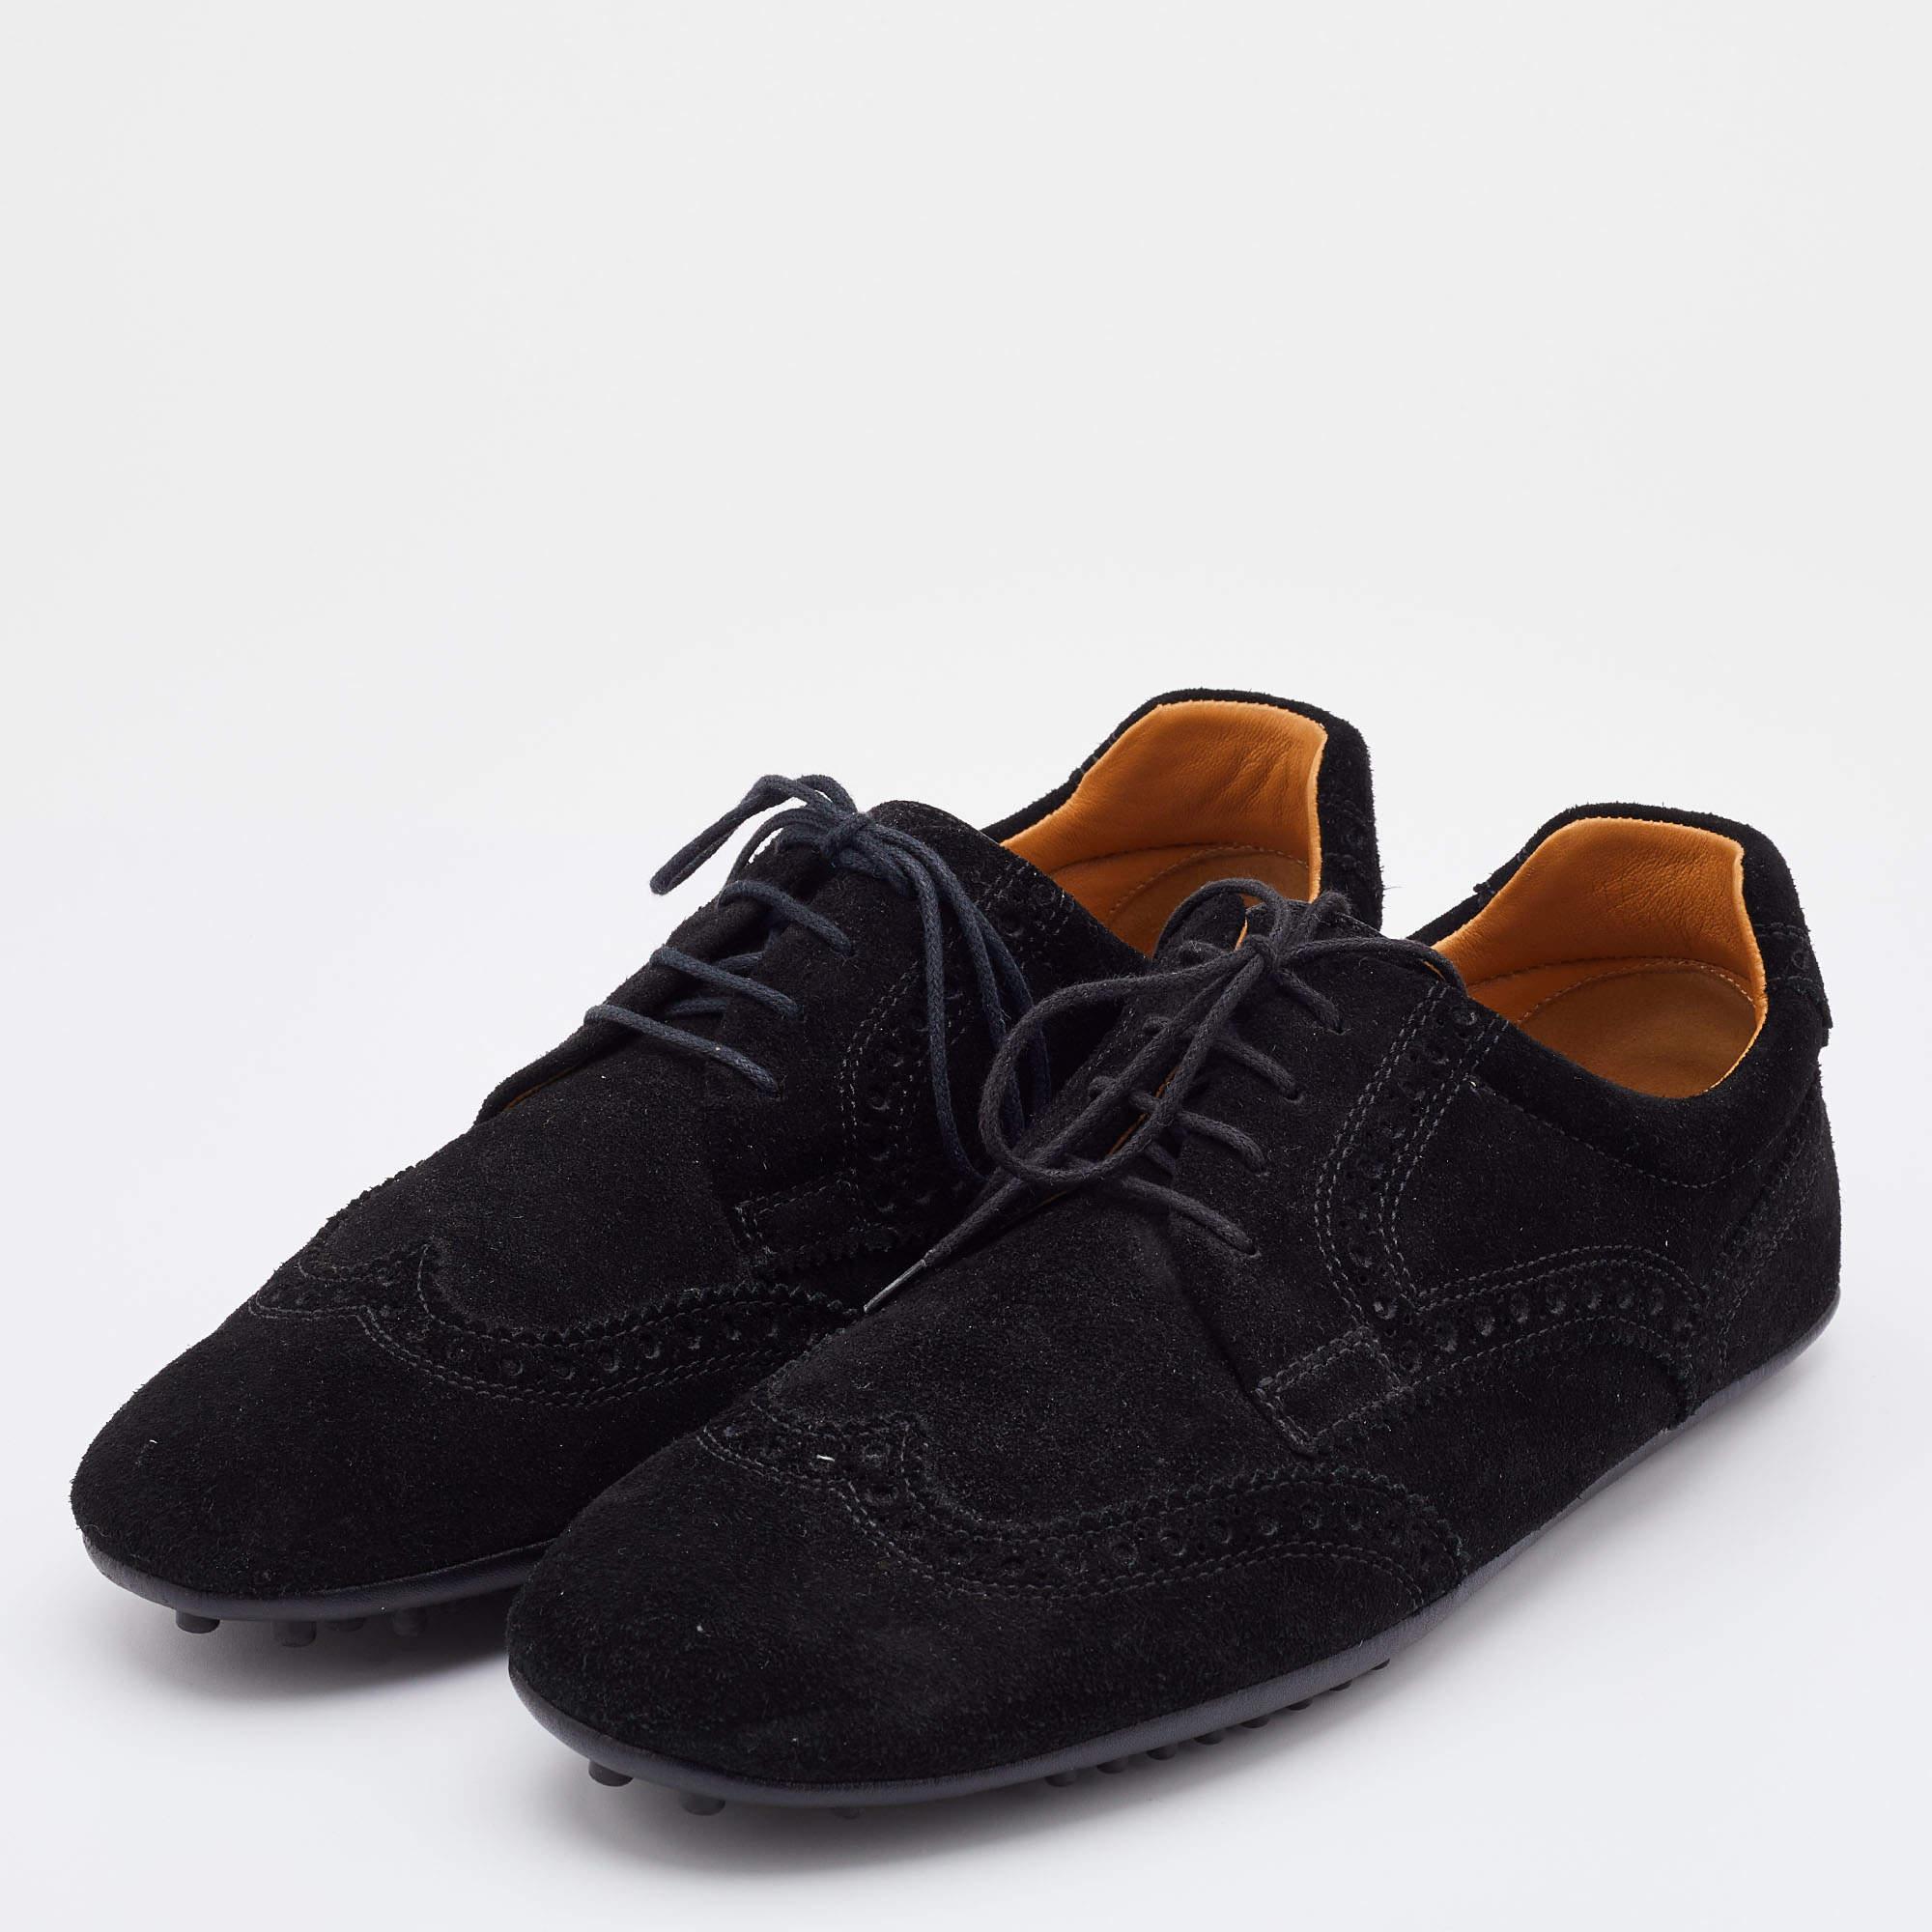 Gucci Black Brogue Suede Derby Lace Up Loafers Size 41 In Good Condition For Sale In Dubai, Al Qouz 2